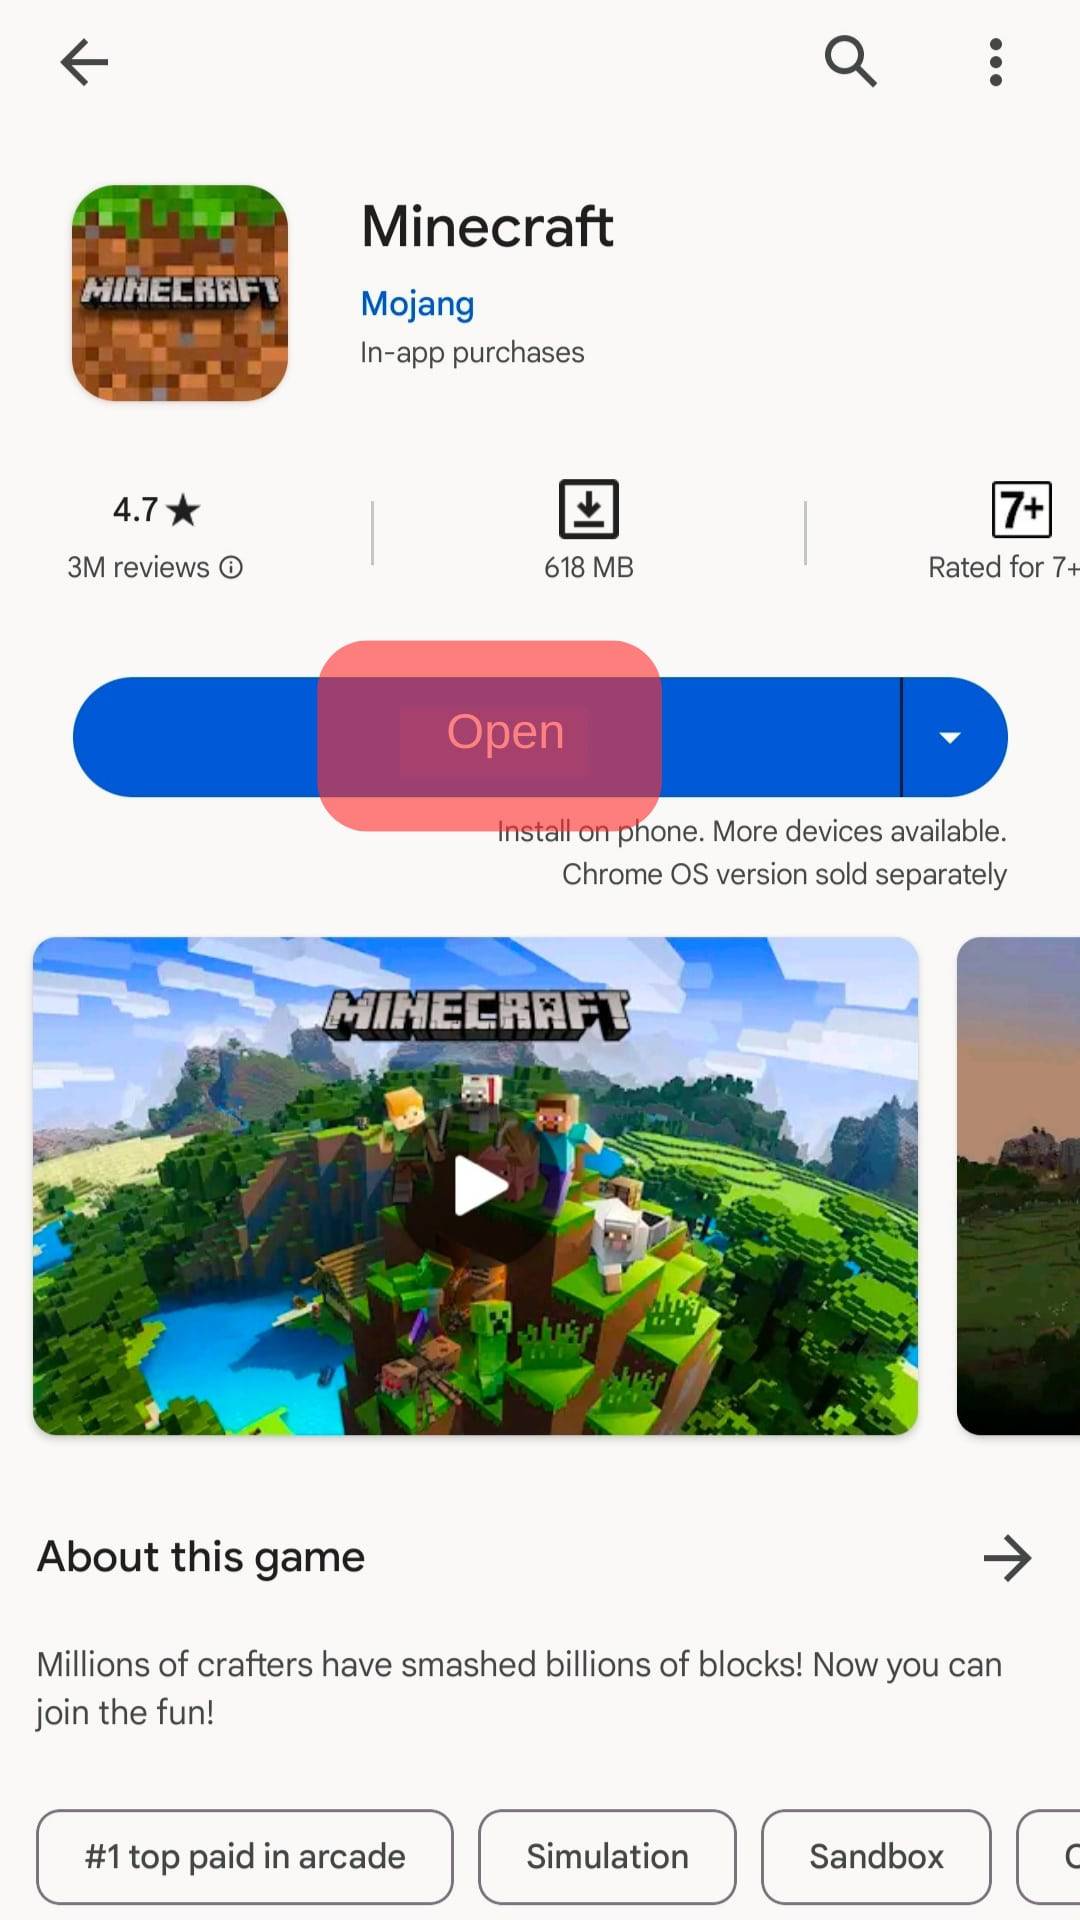 Launch The Minecraft Game On Your Mobile Device.